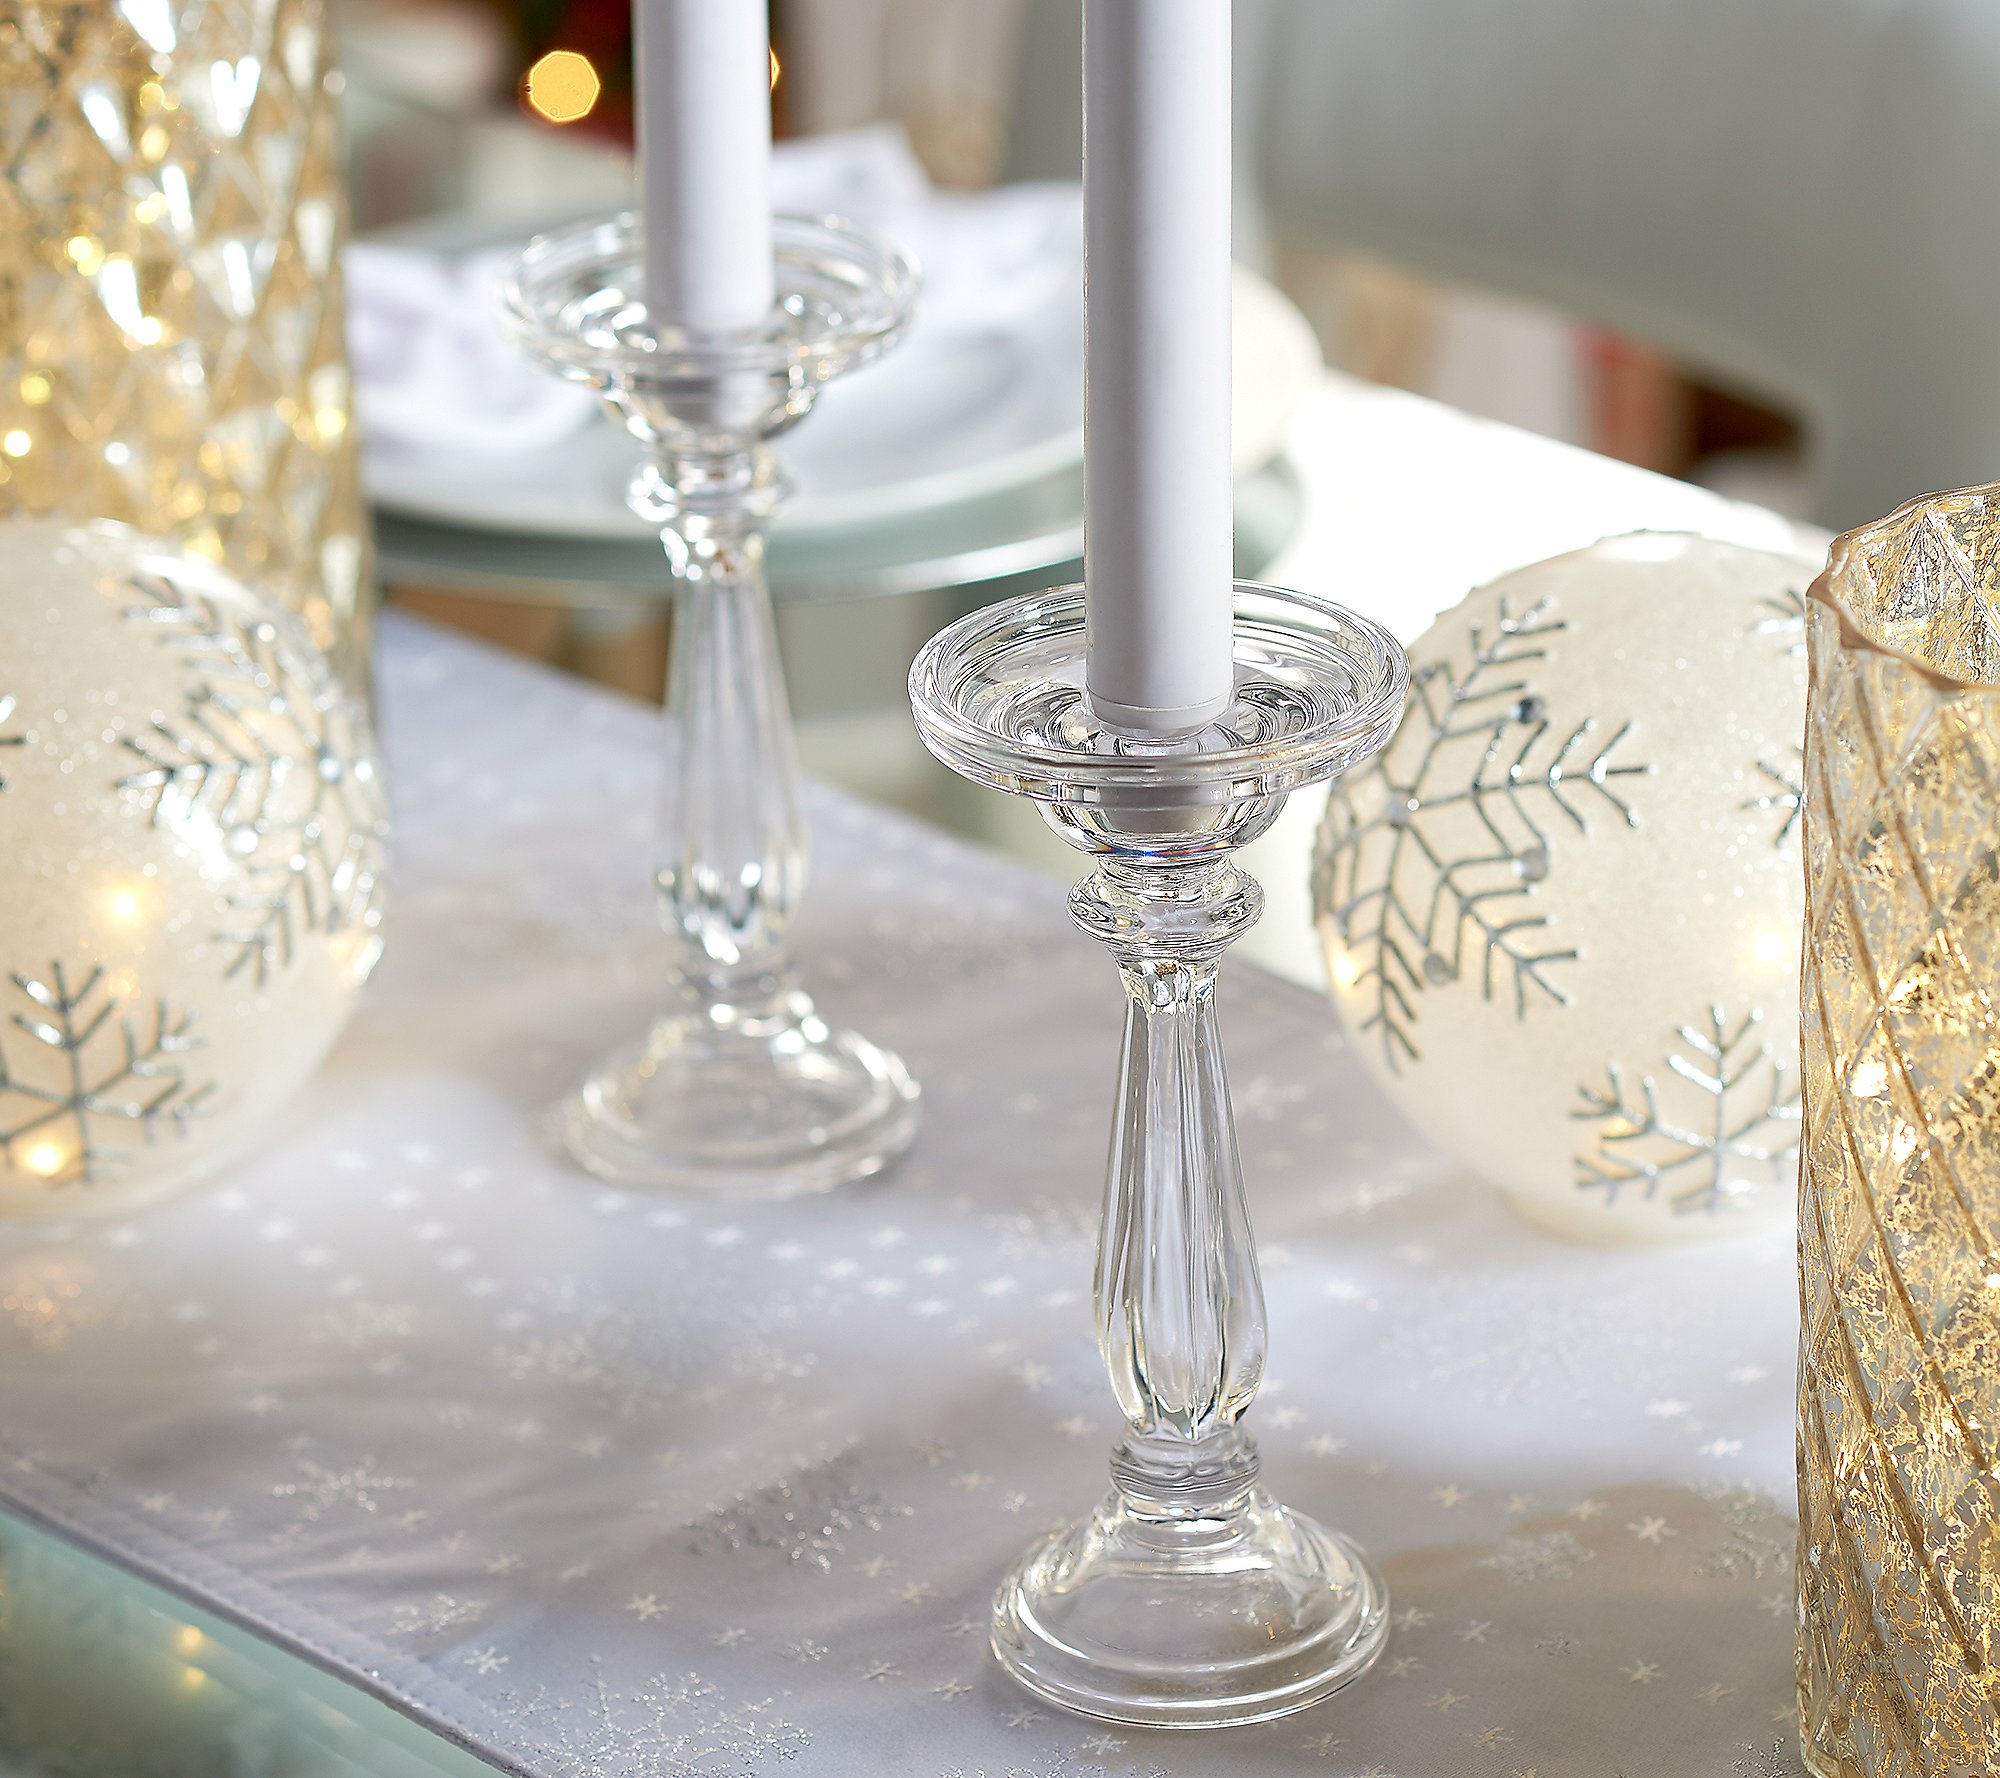 Details about   Illuminated Mercury Glass Candle Holder Pedestal by Valerie 